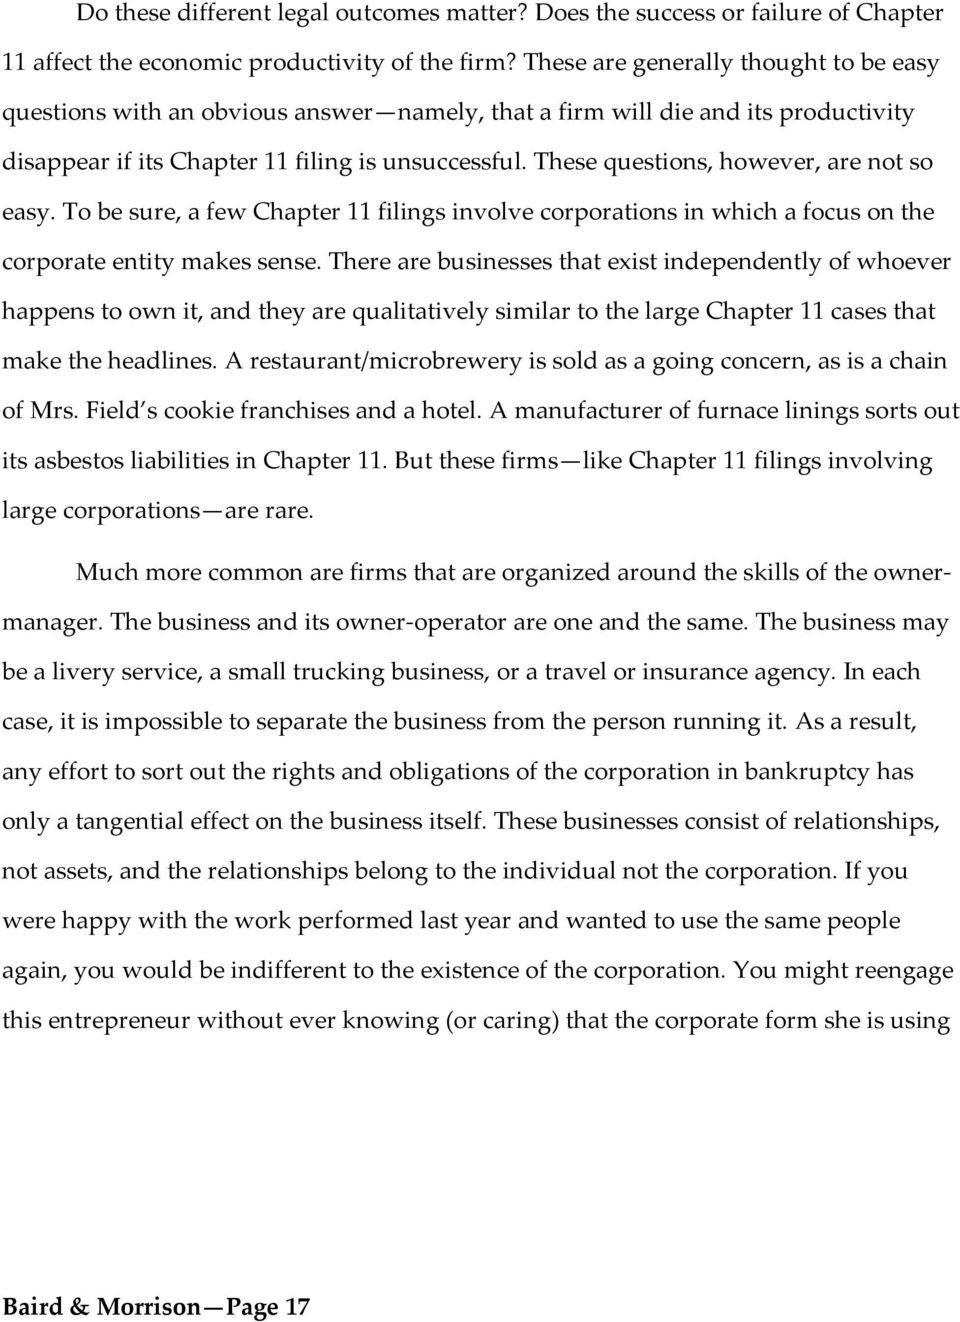 These questions, however, are not so easy. To be sure, a few Chapter 11 filings involve corporations in which a focus on the corporate entity makes sense.